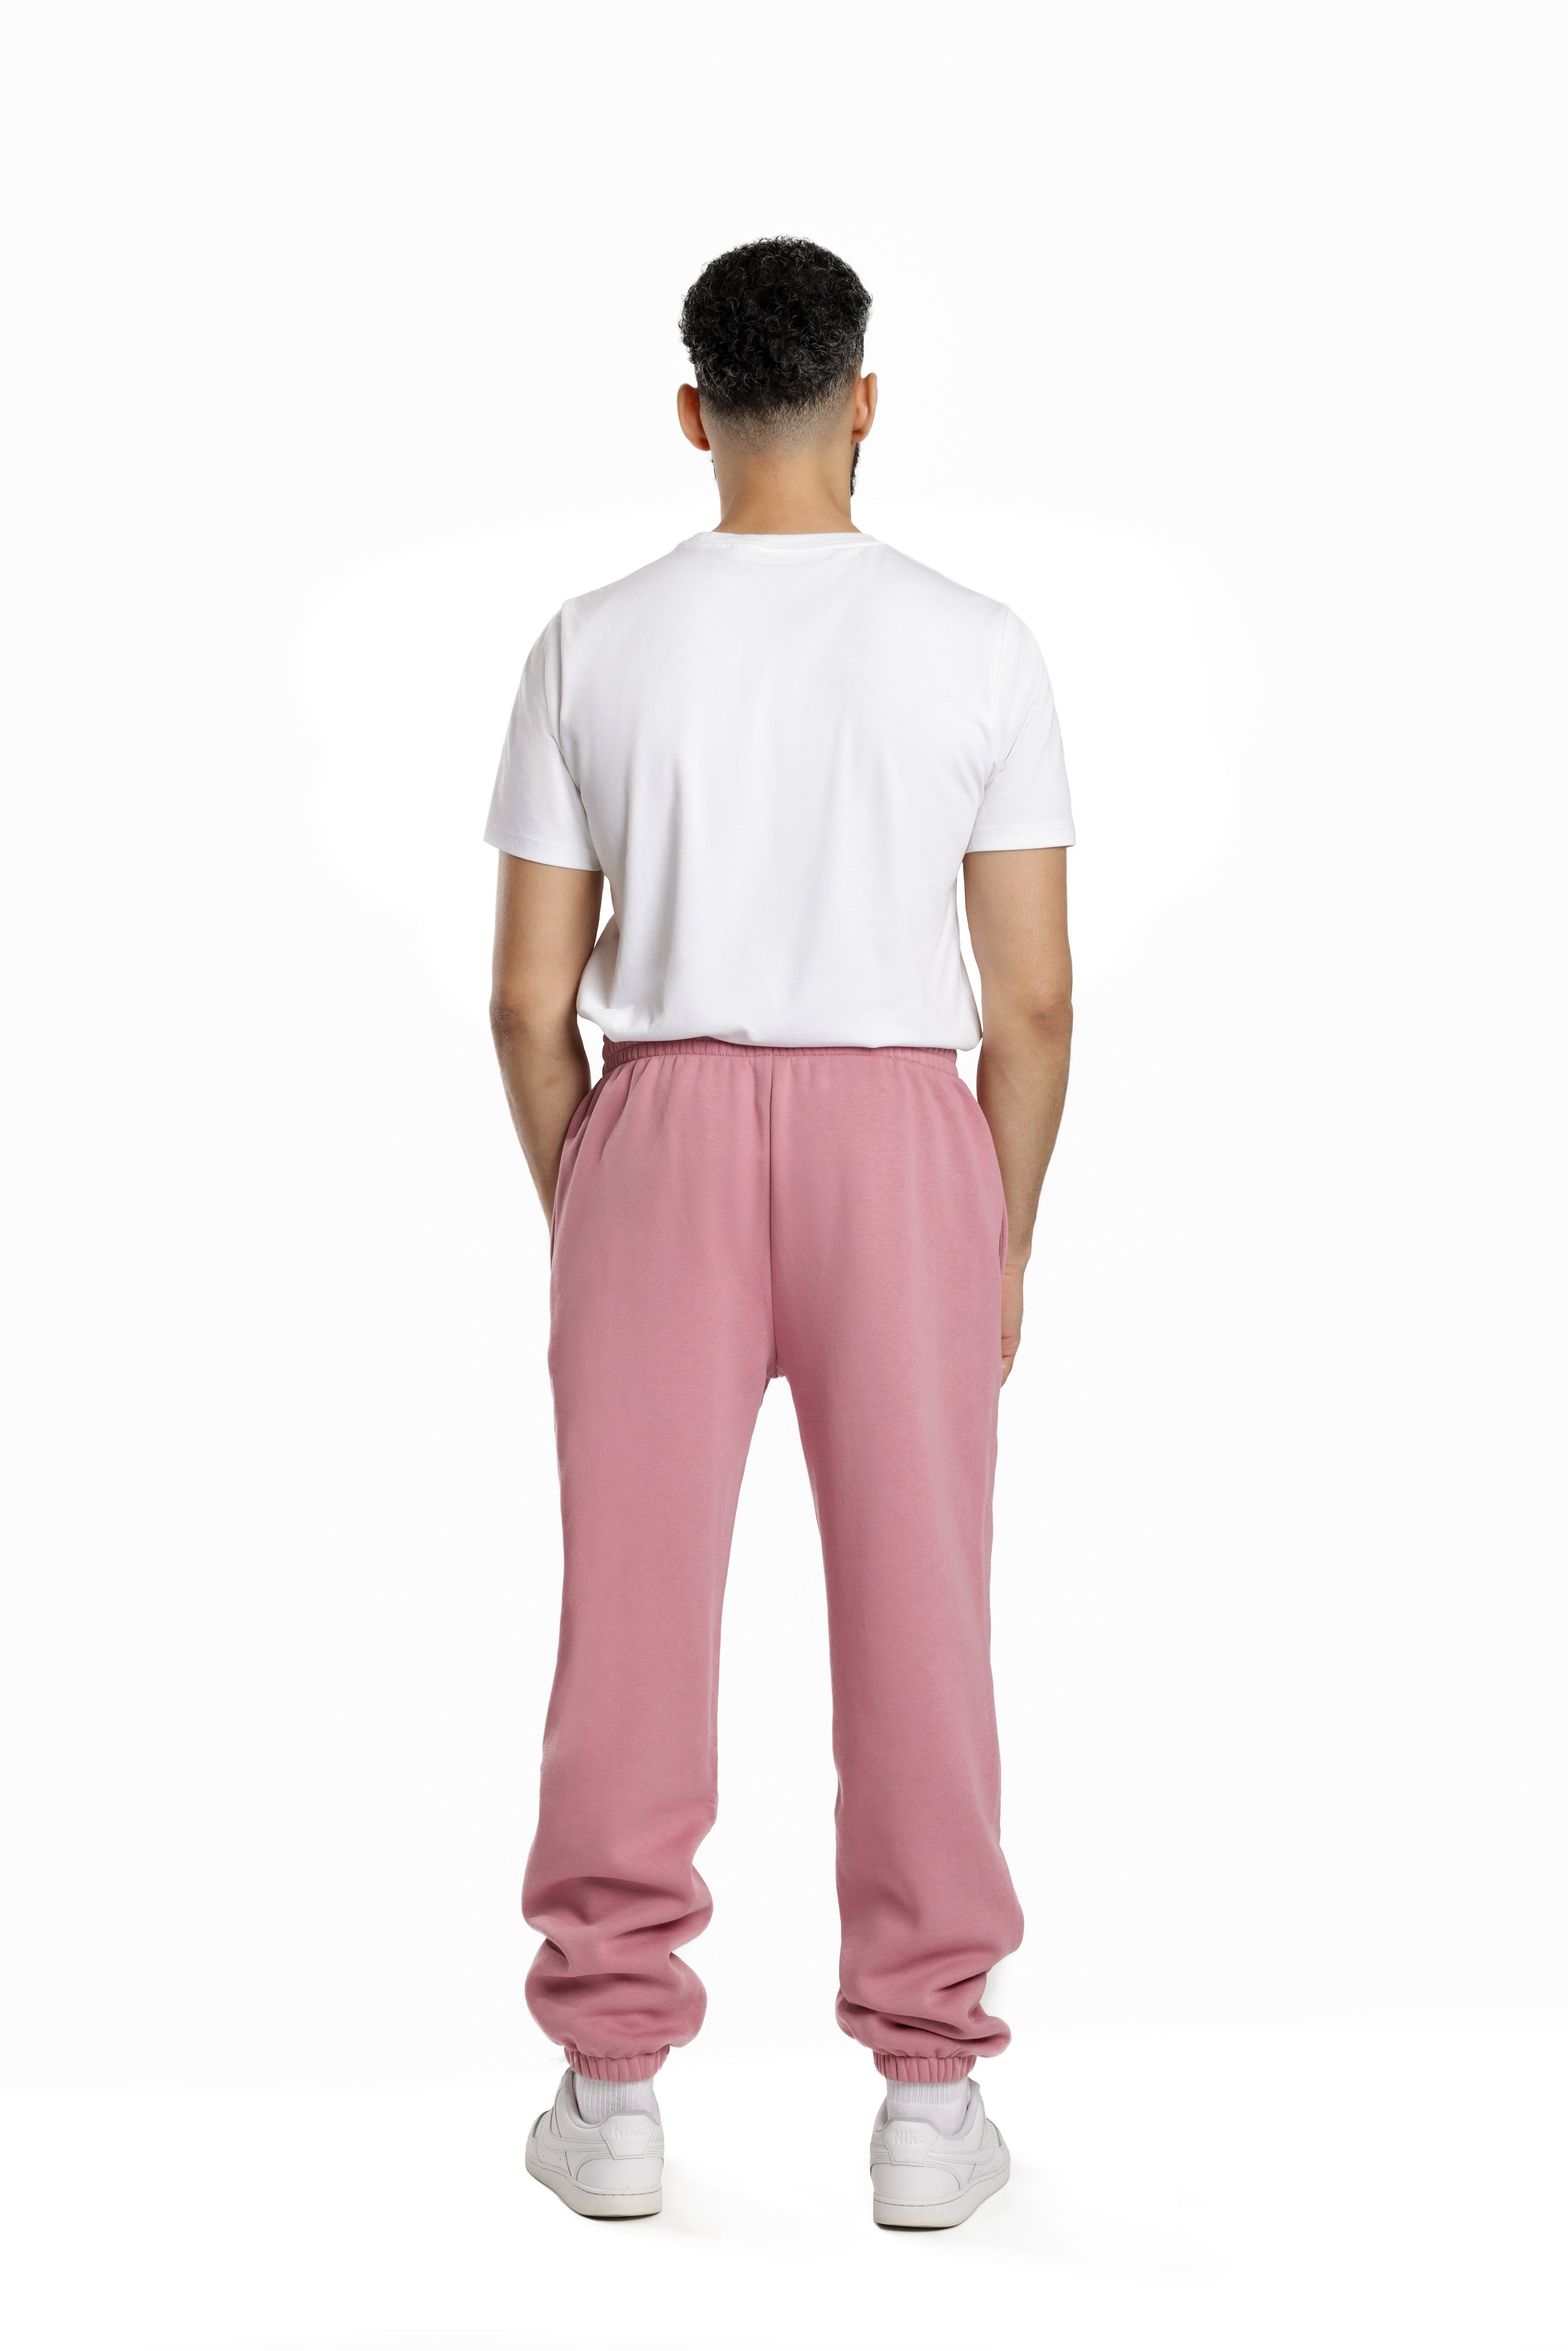 Men's joggers in orchid pink